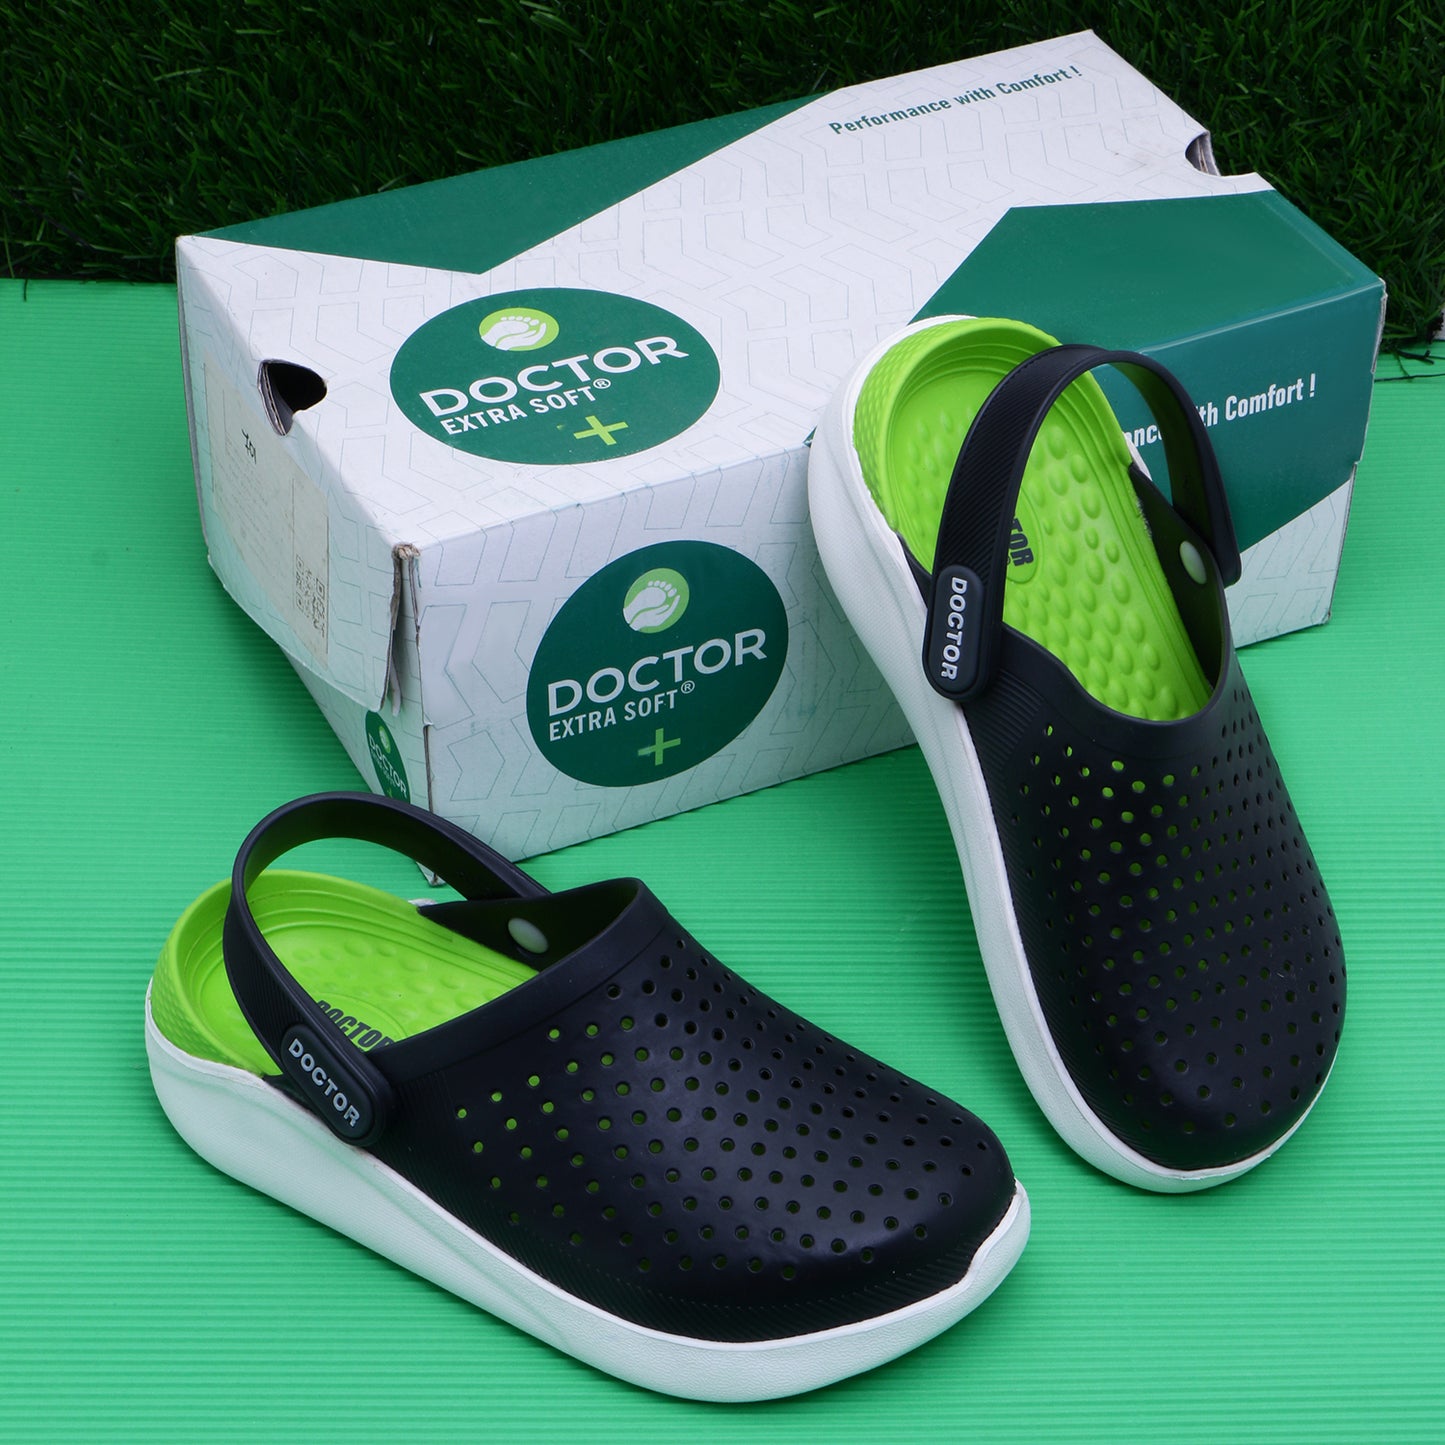 DOCTOR EXTRA SOFT D-509 Unisex-Child Kids Classic Ultra Soft Clogs/Sandals with Adjustable Back Strap| Comfortable & Lightweight| Stylish & Anti-Skid| Indoor & Outdoor Casual Sports Mules Boys/Girls